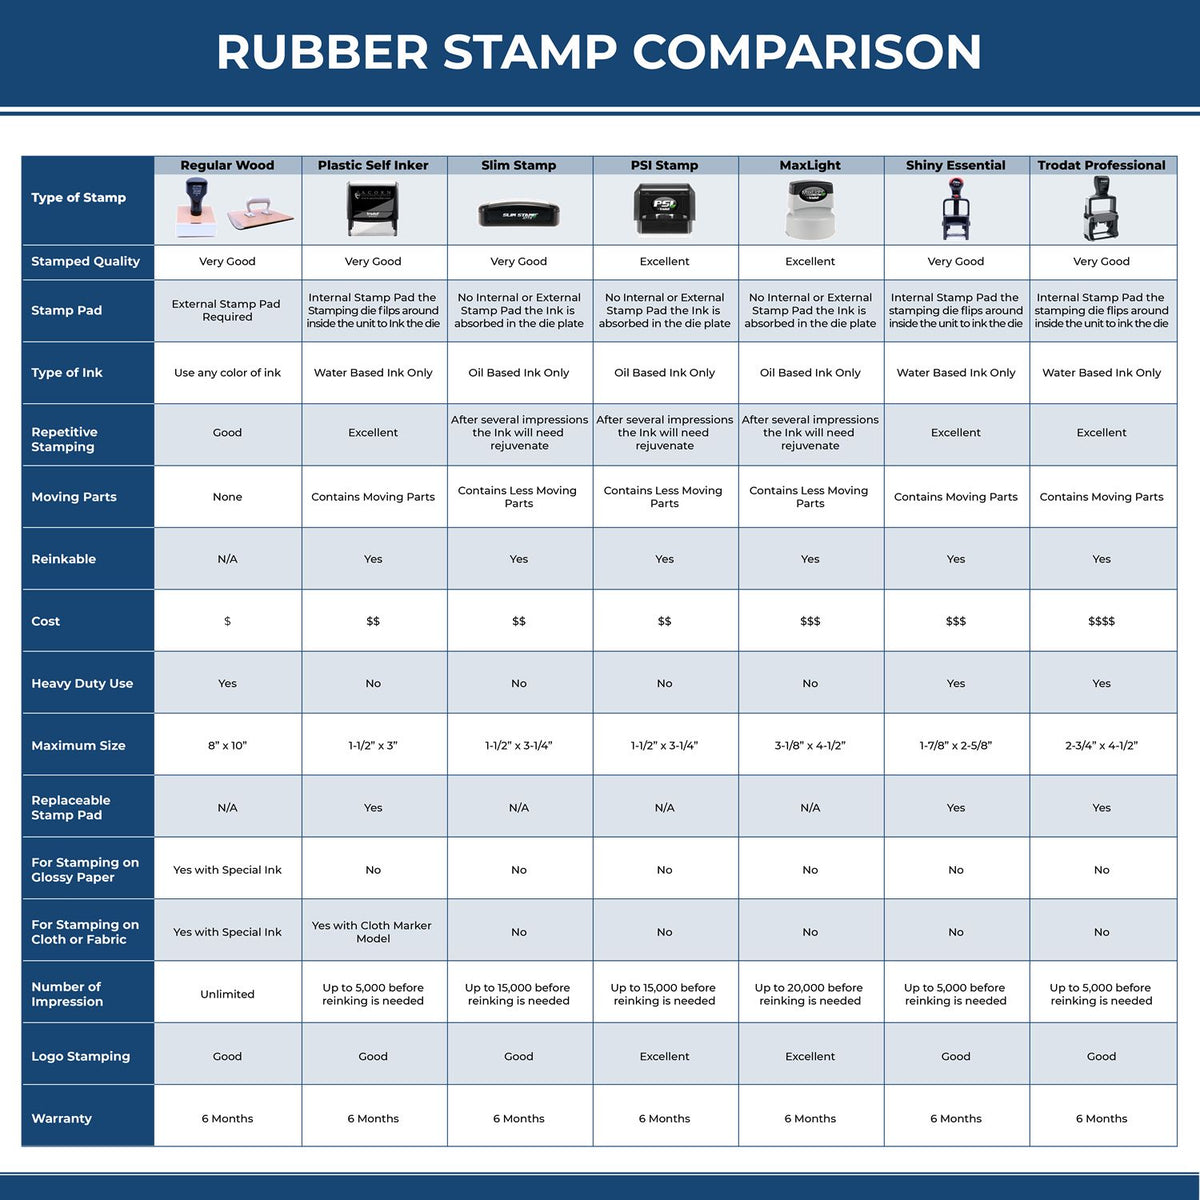 A comparison chart for the different types of mount models available for the Wooden Handle New Mexico State Seal Notary Public Stamp.